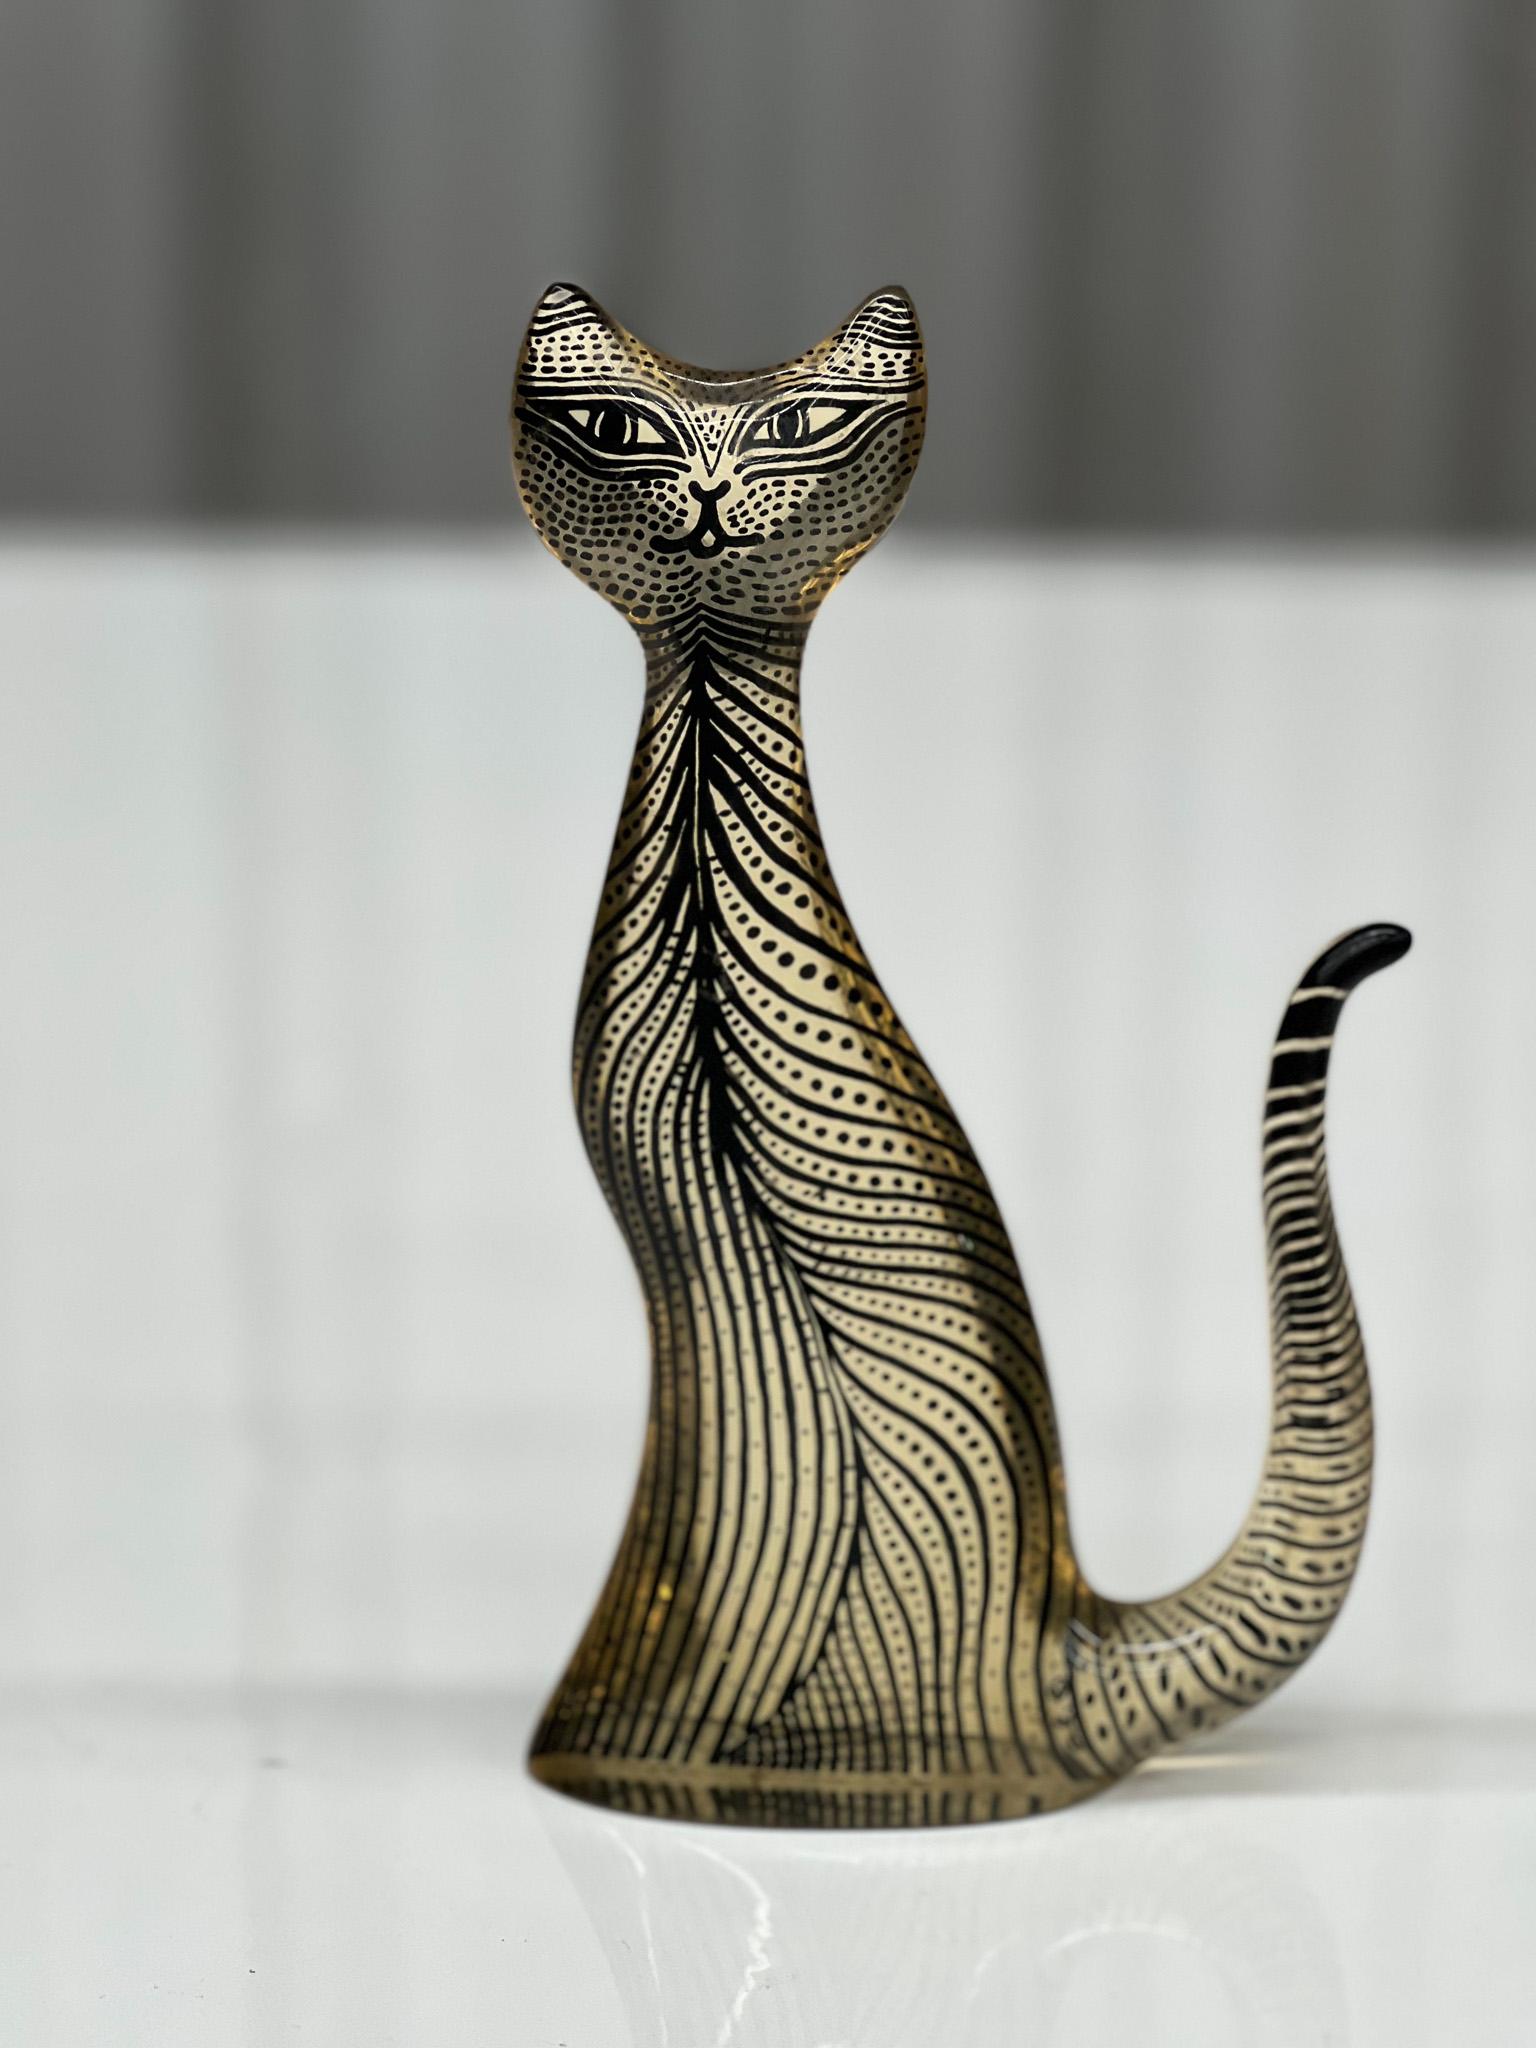 This Brazilian modern kinetic sculpture of a cat in resin was designed by Abraham Palatinik in the 1960s. This is part of the Artemis collection that features hundreds of different animals, each with sleek, flat silhouettes. This fun and playful